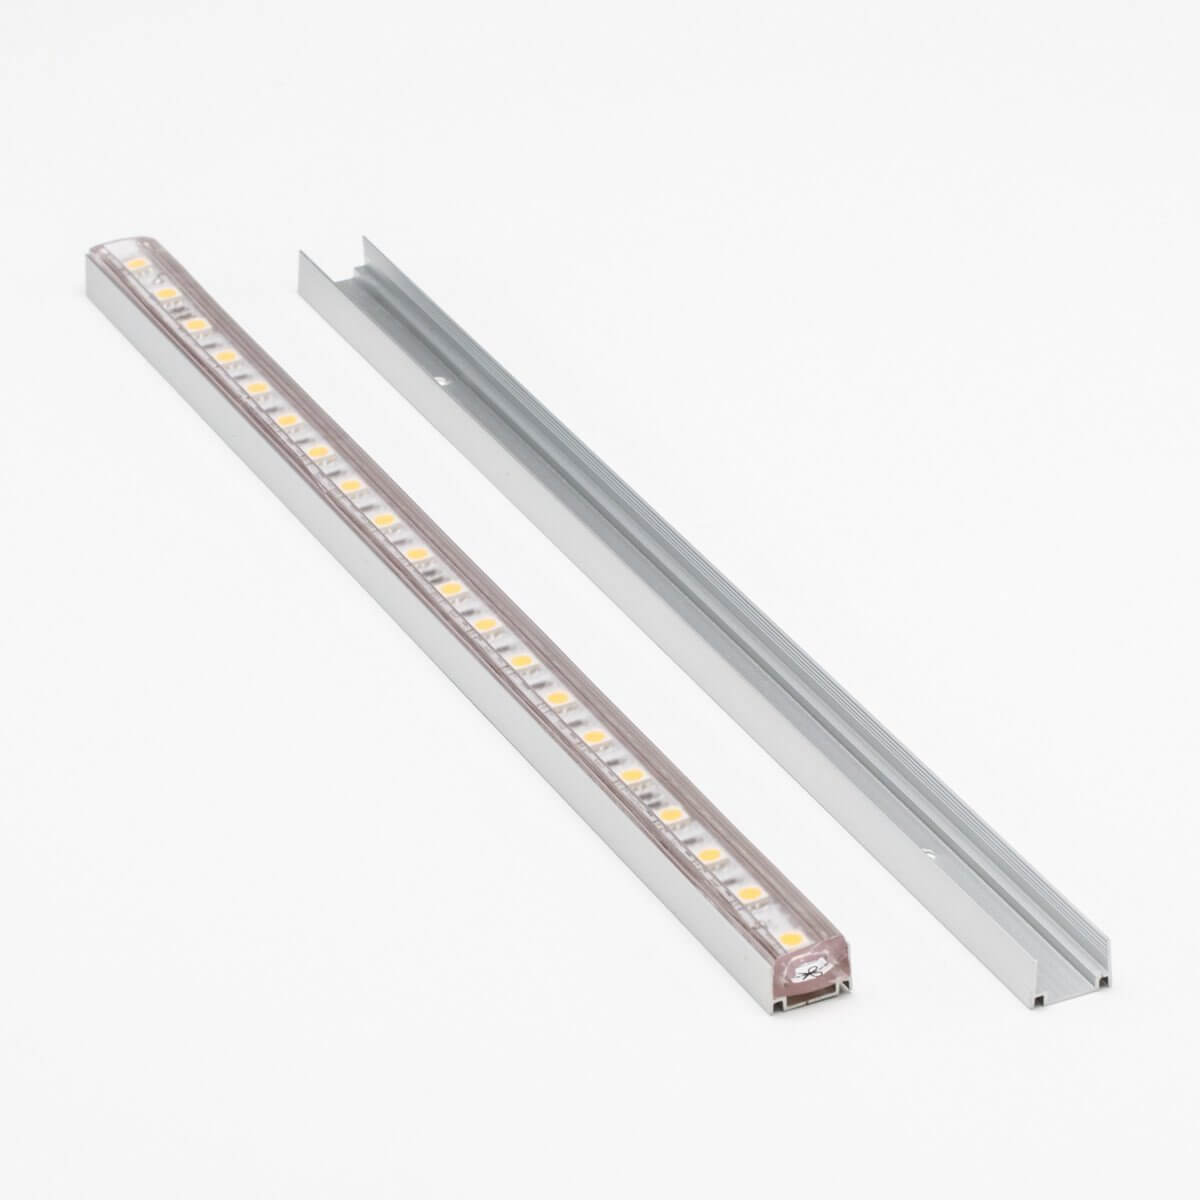 Litever 10 Pack Recess Aluminum Channels for LED Strips 1 Meter / 3.3 FT-  Flush Mounting for Max 12mm Wide Flexible or Rigid LED Strip Frosted